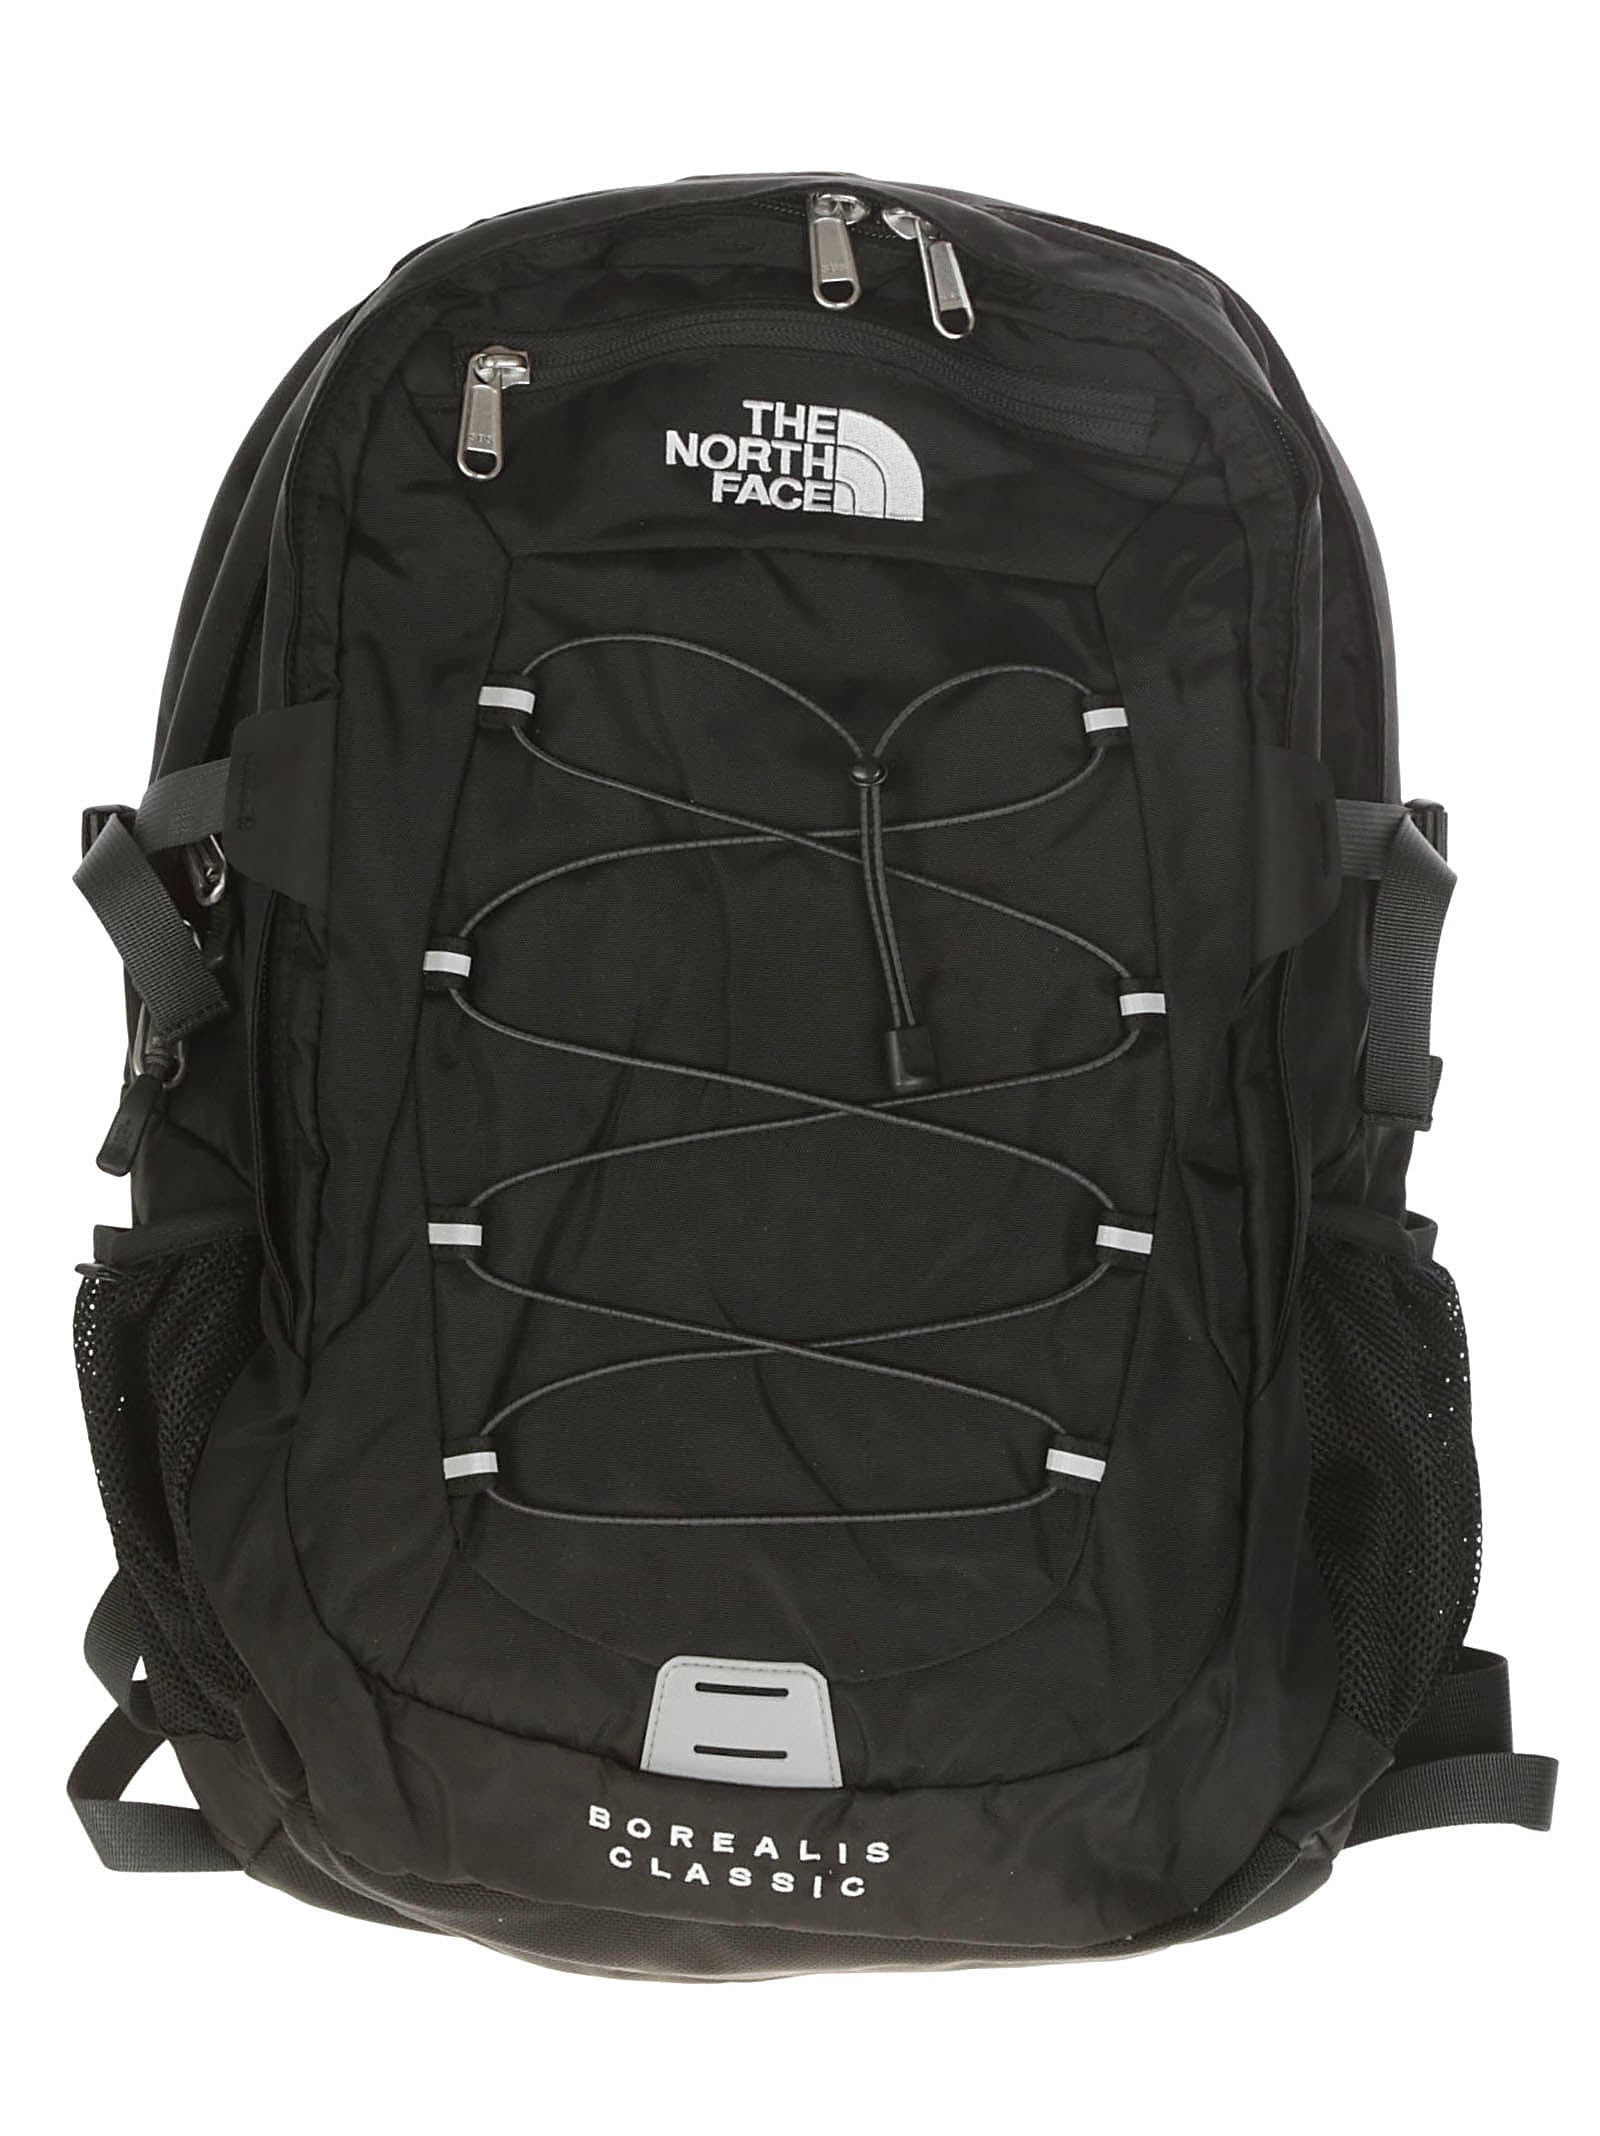 THE NORTH FACE BOREALIS CLASSIC BACKPACK,11292246